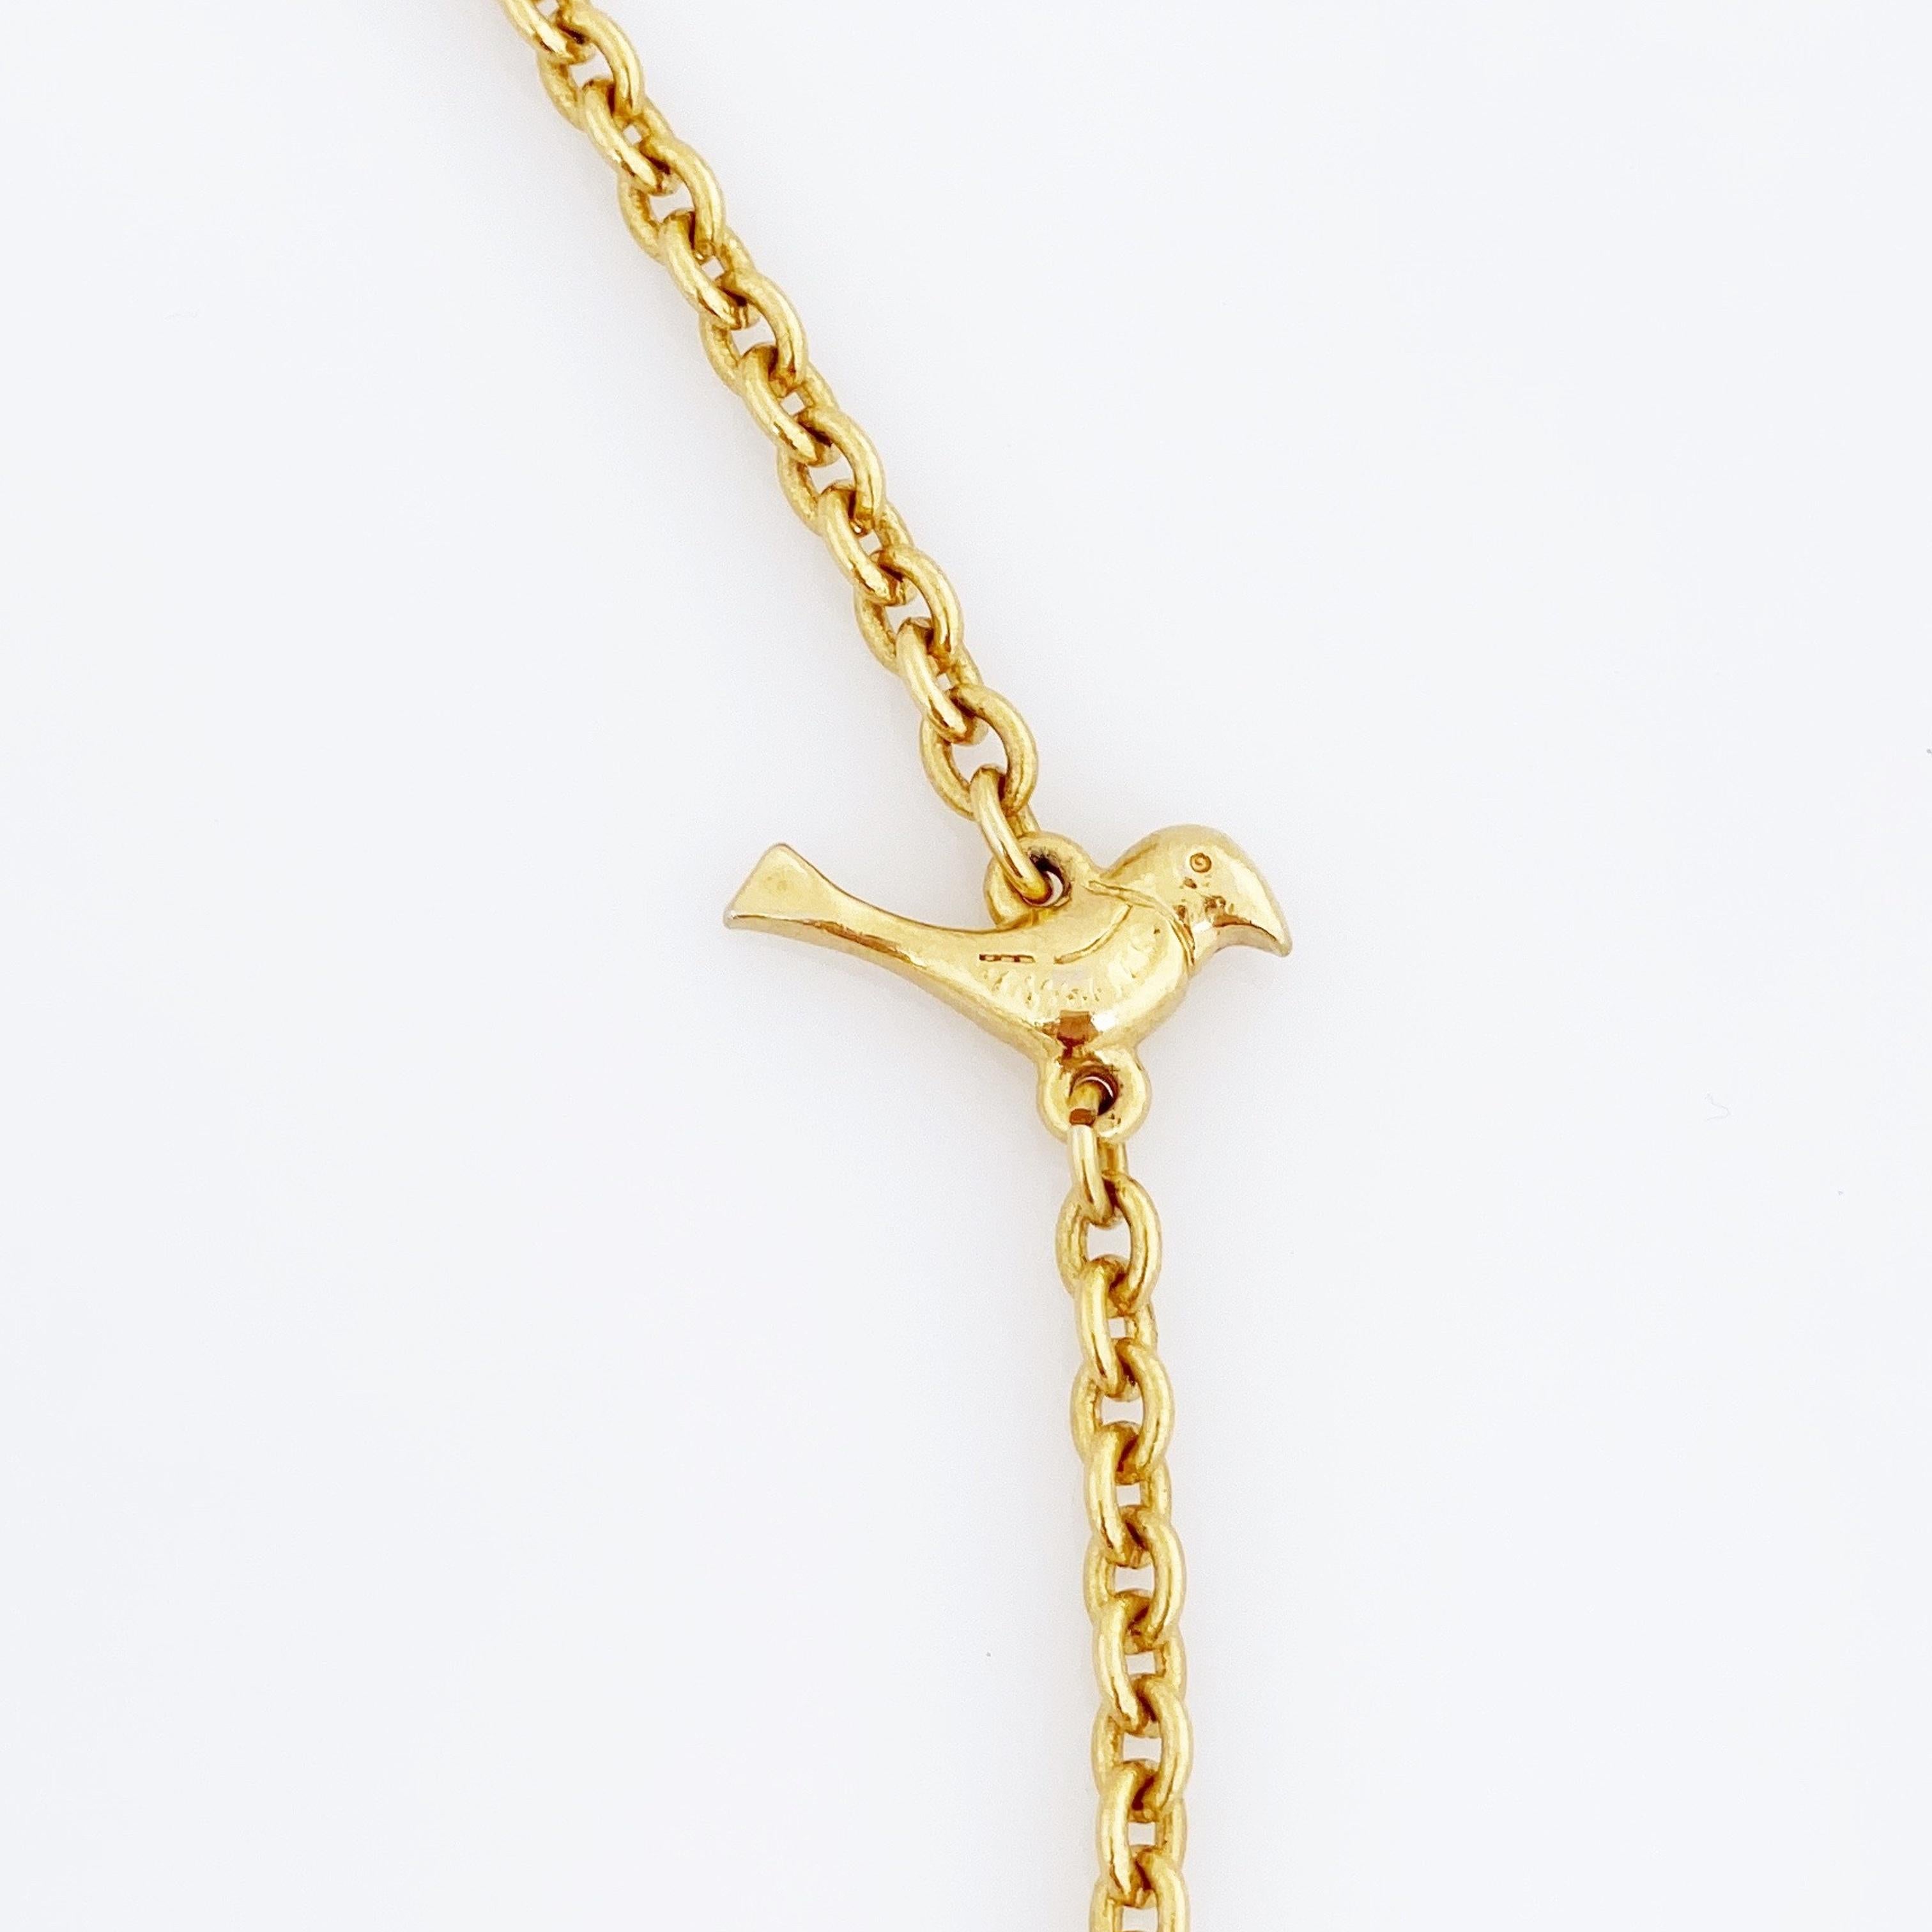 Women's Gold Animal Totem Charm Necklace By Trifari, 1970s